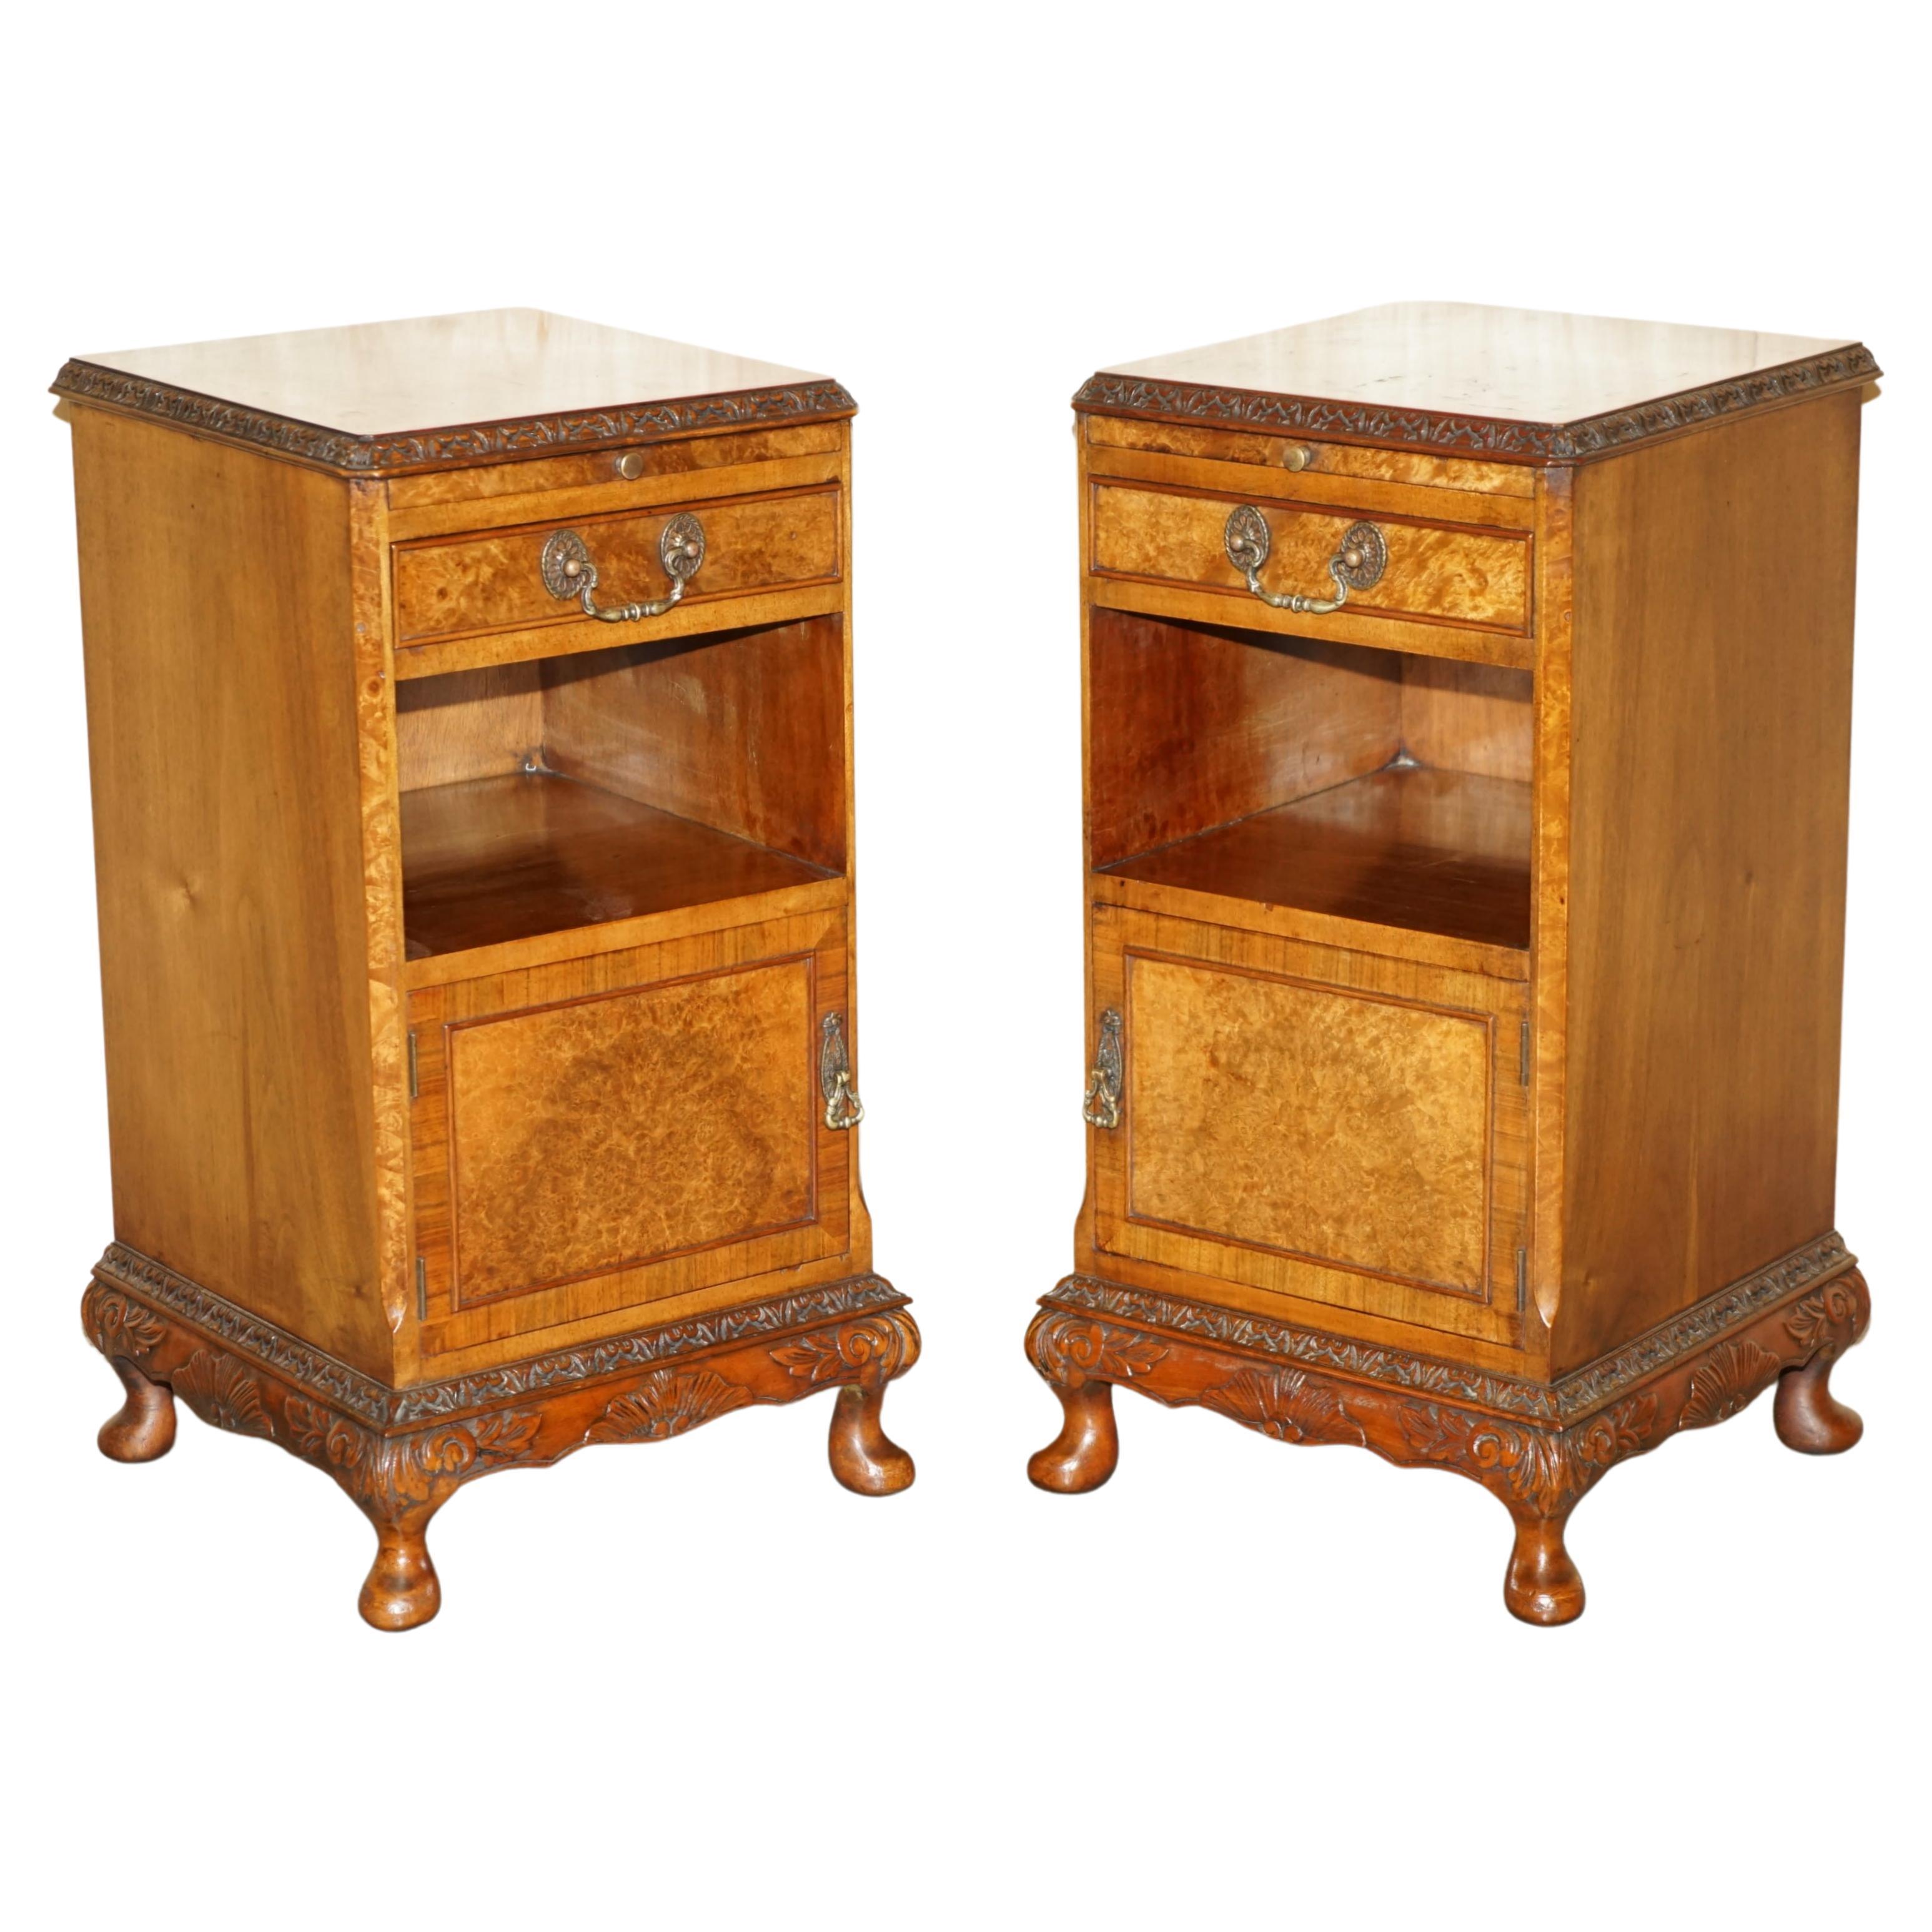 Royal House Antiques

Royal House Antiques is delighted to offer for sale this absolutely exquisite pair of fully restored, Burr Walnut bedside or side tables with butlers serving trays 

Please note the delivery fee listed is just a guide, it